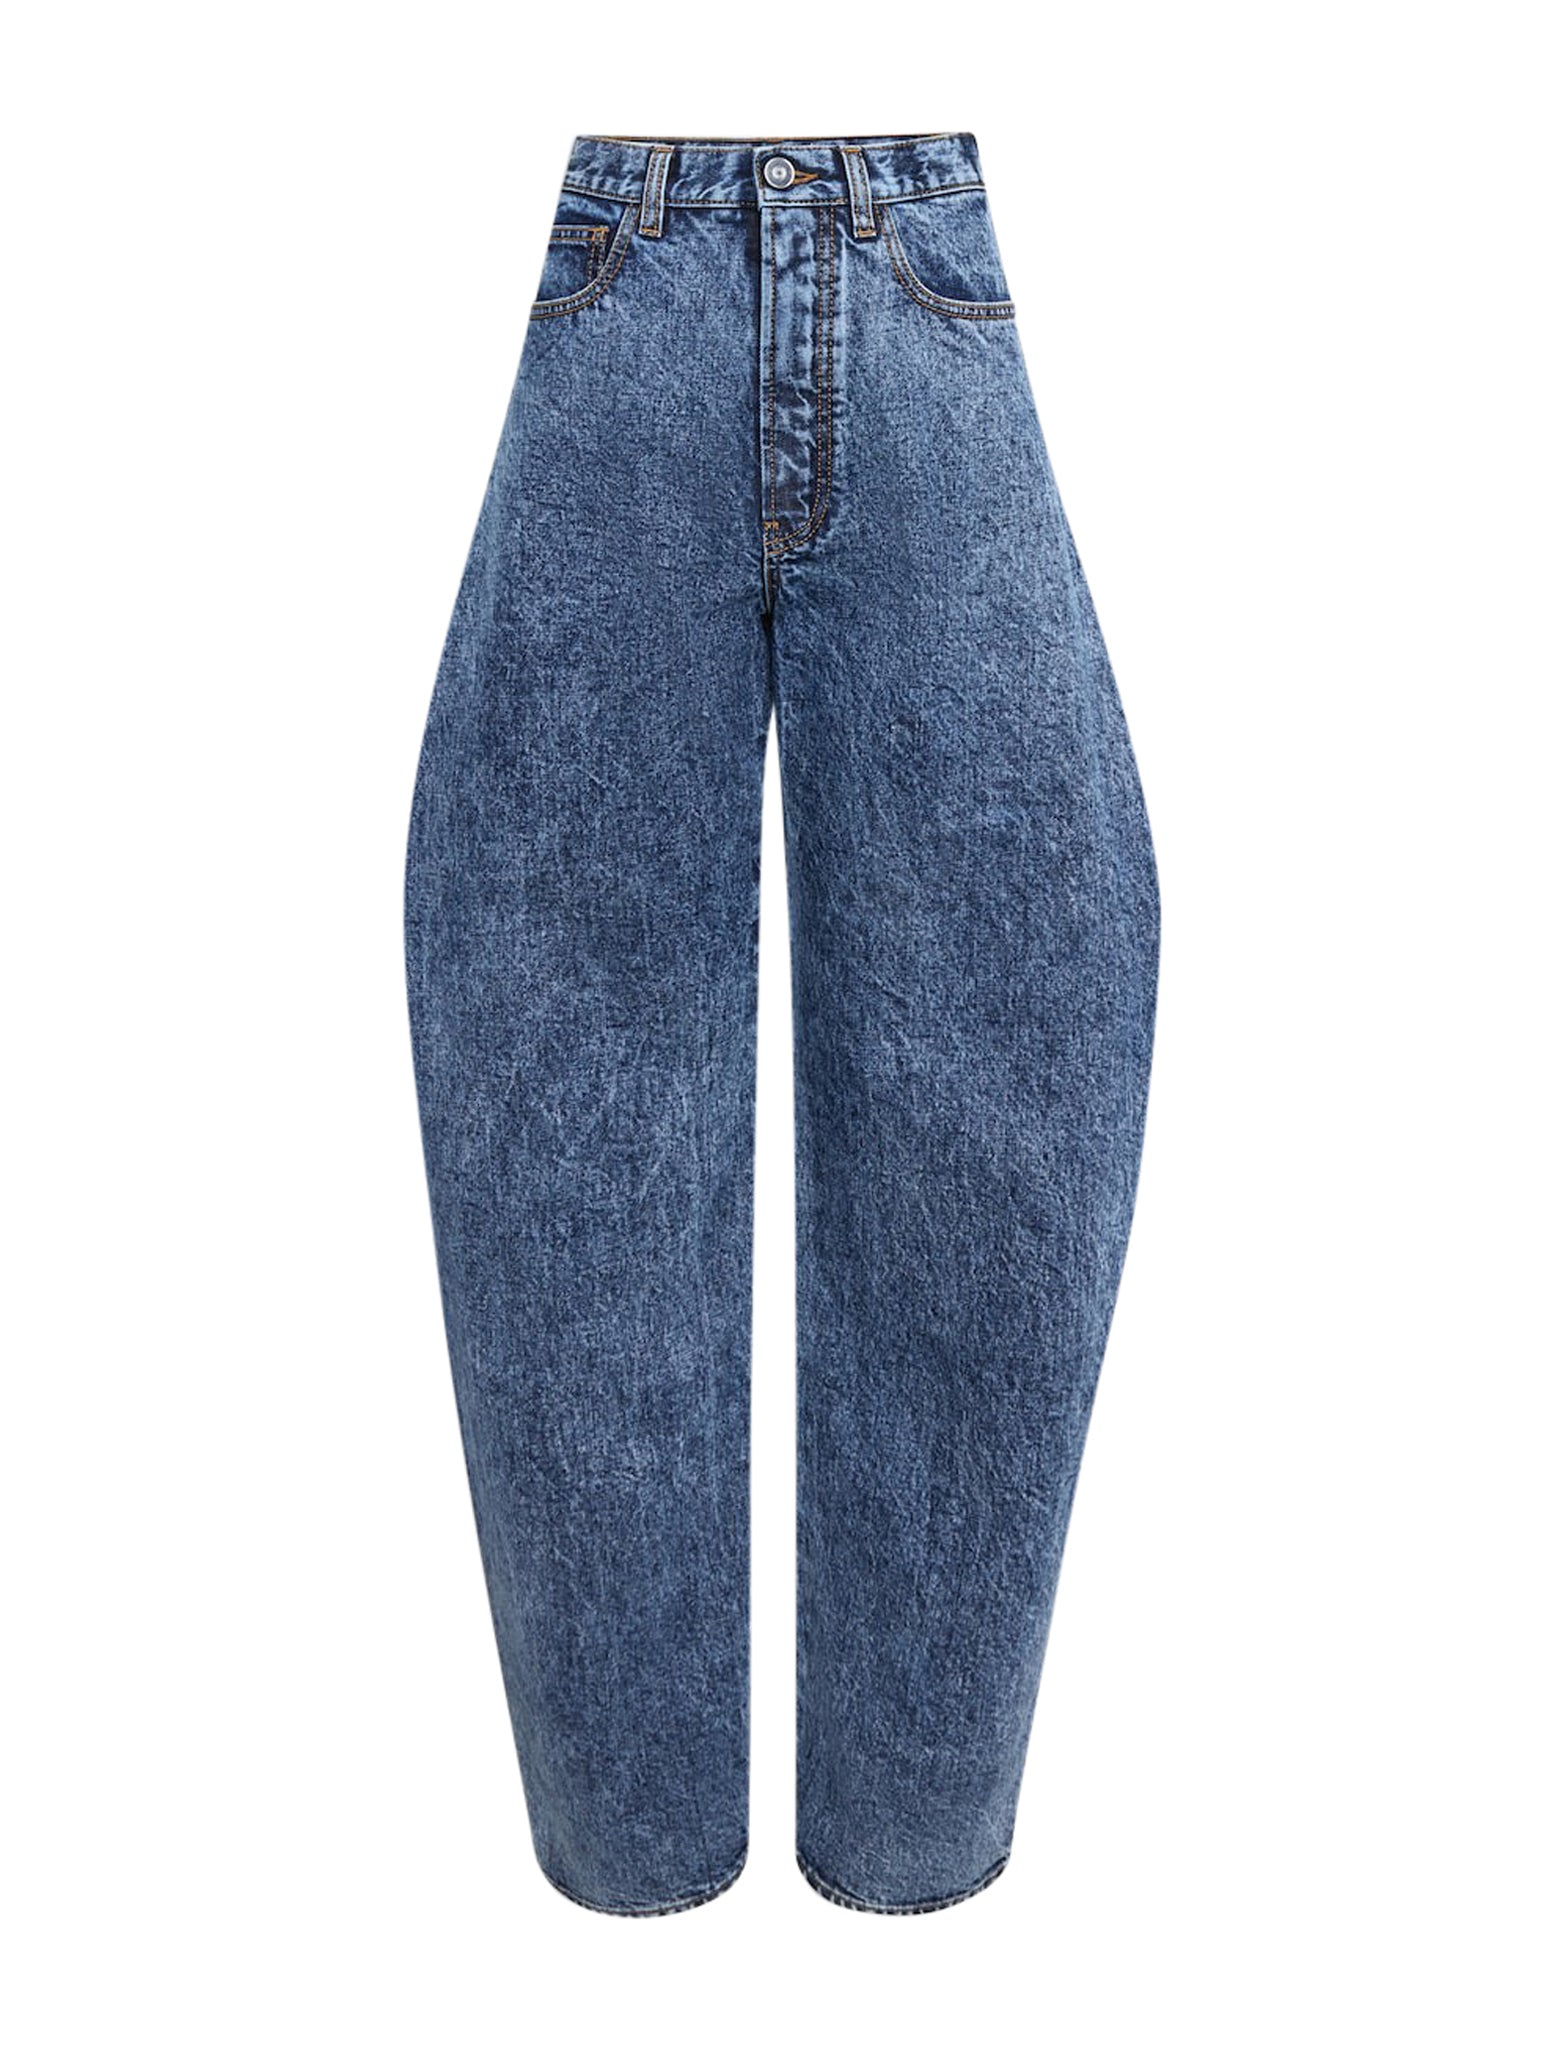 ROUNDED JEANS IN SNOW DENIM